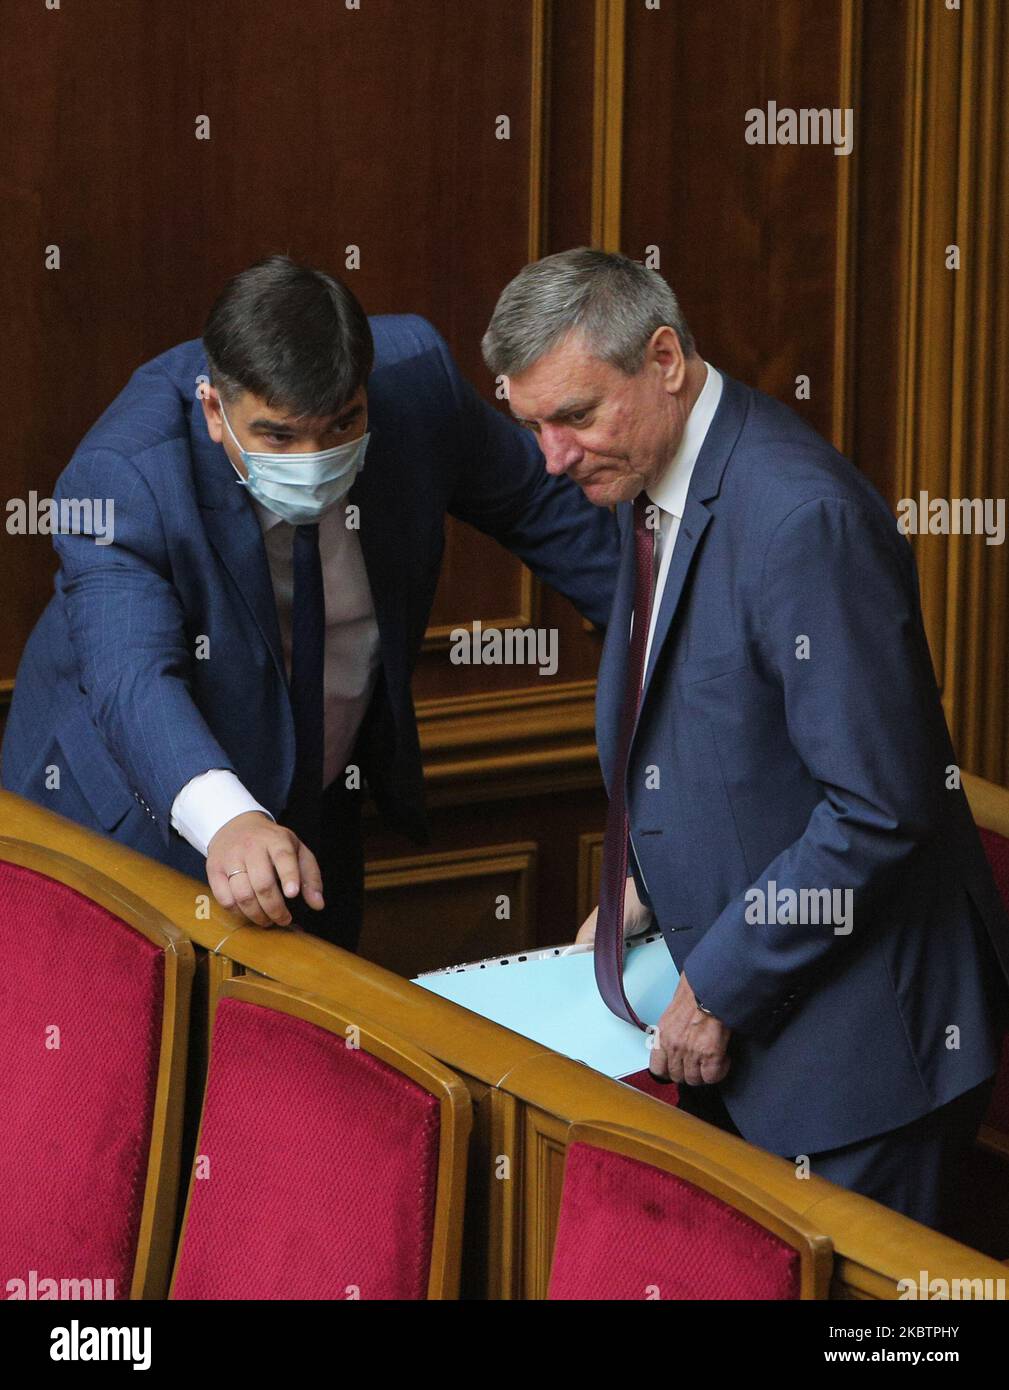 Vice minister, Minister for Strategic Industries Kyrylo Shevchenko (R) talks to lawmaker during a session of Parliament in Kyiv, Ukraine, July 16, 2020. Ukrainian Parliament voted for Heads of Central Bank, Antimonopoly Committee and appointed new Vice minister, Minister for Strategic Industries. (Photo by Sergii Kharchenko/NurPhoto) Stock Photo